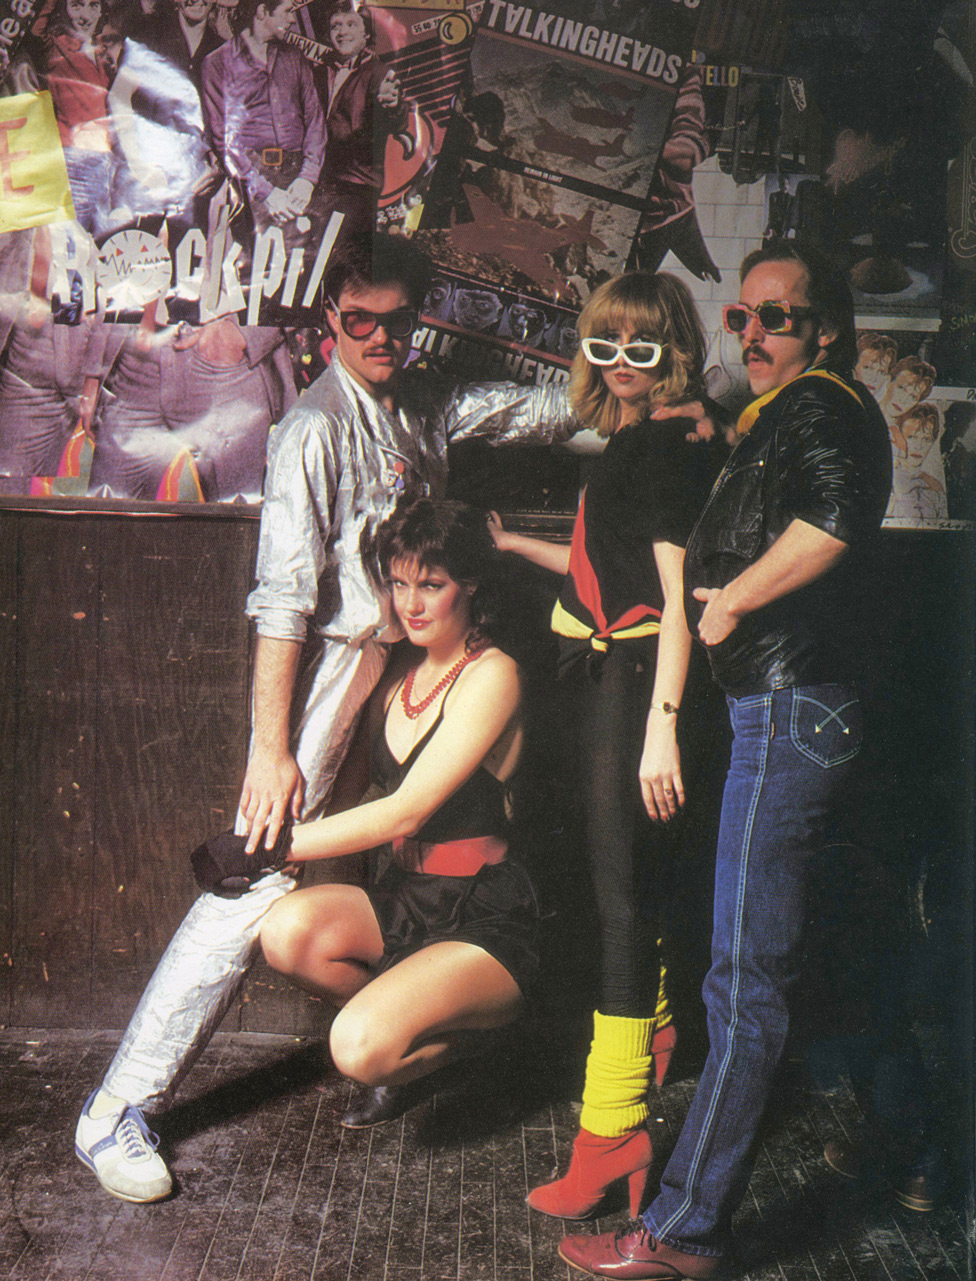 group photo of Mizzou students in 1980s fashion